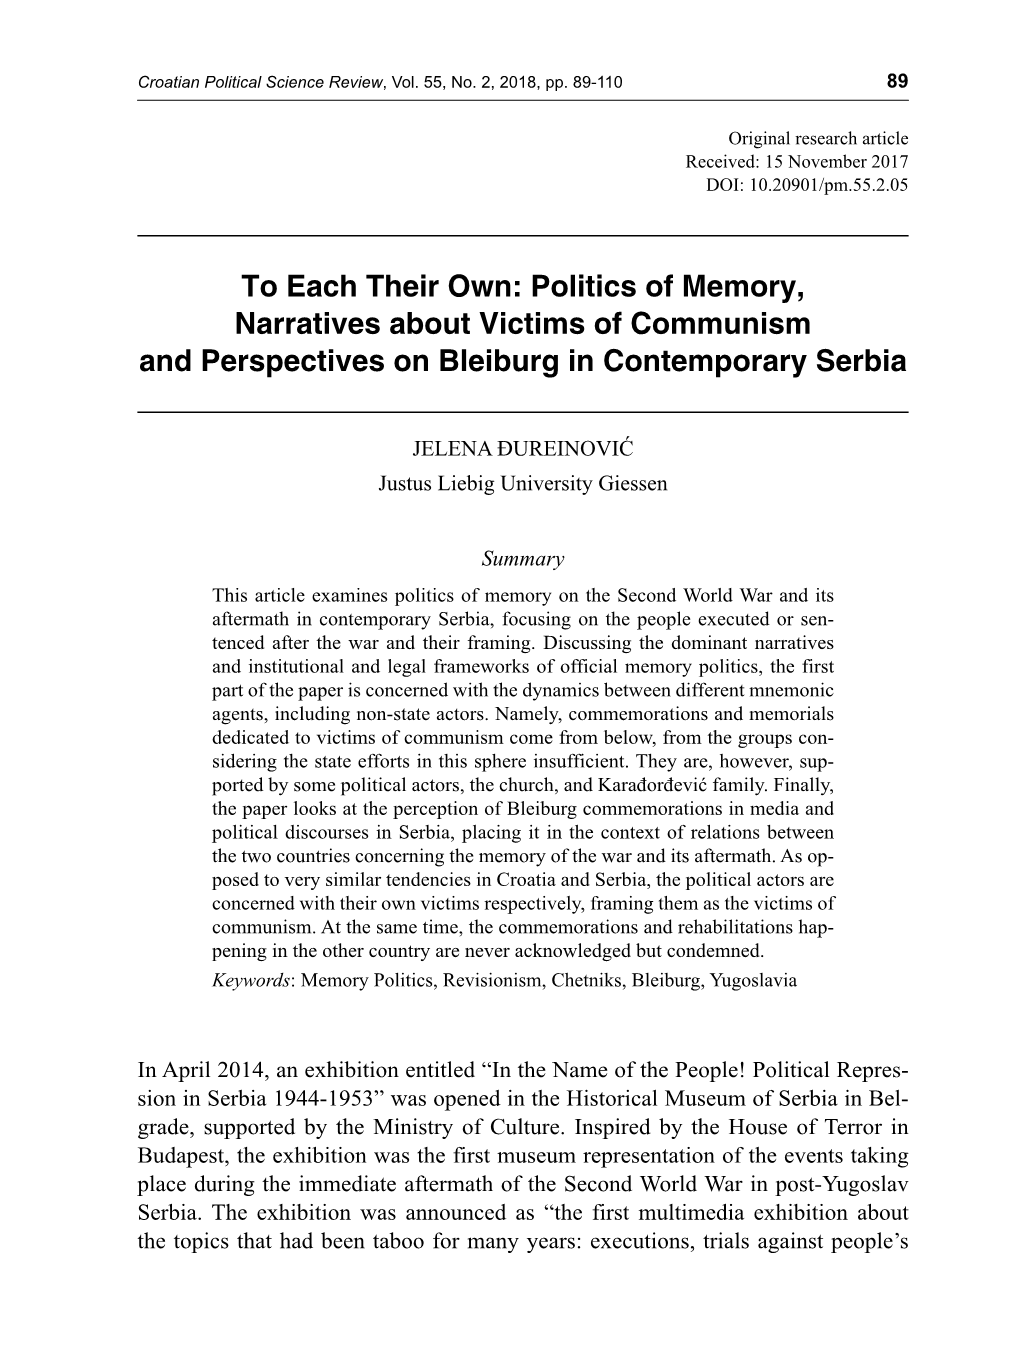 To Each Their Own: Politics of Memory, Narratives About Victims of Communism and Perspectives on Bleiburg in Contemporary Serbia